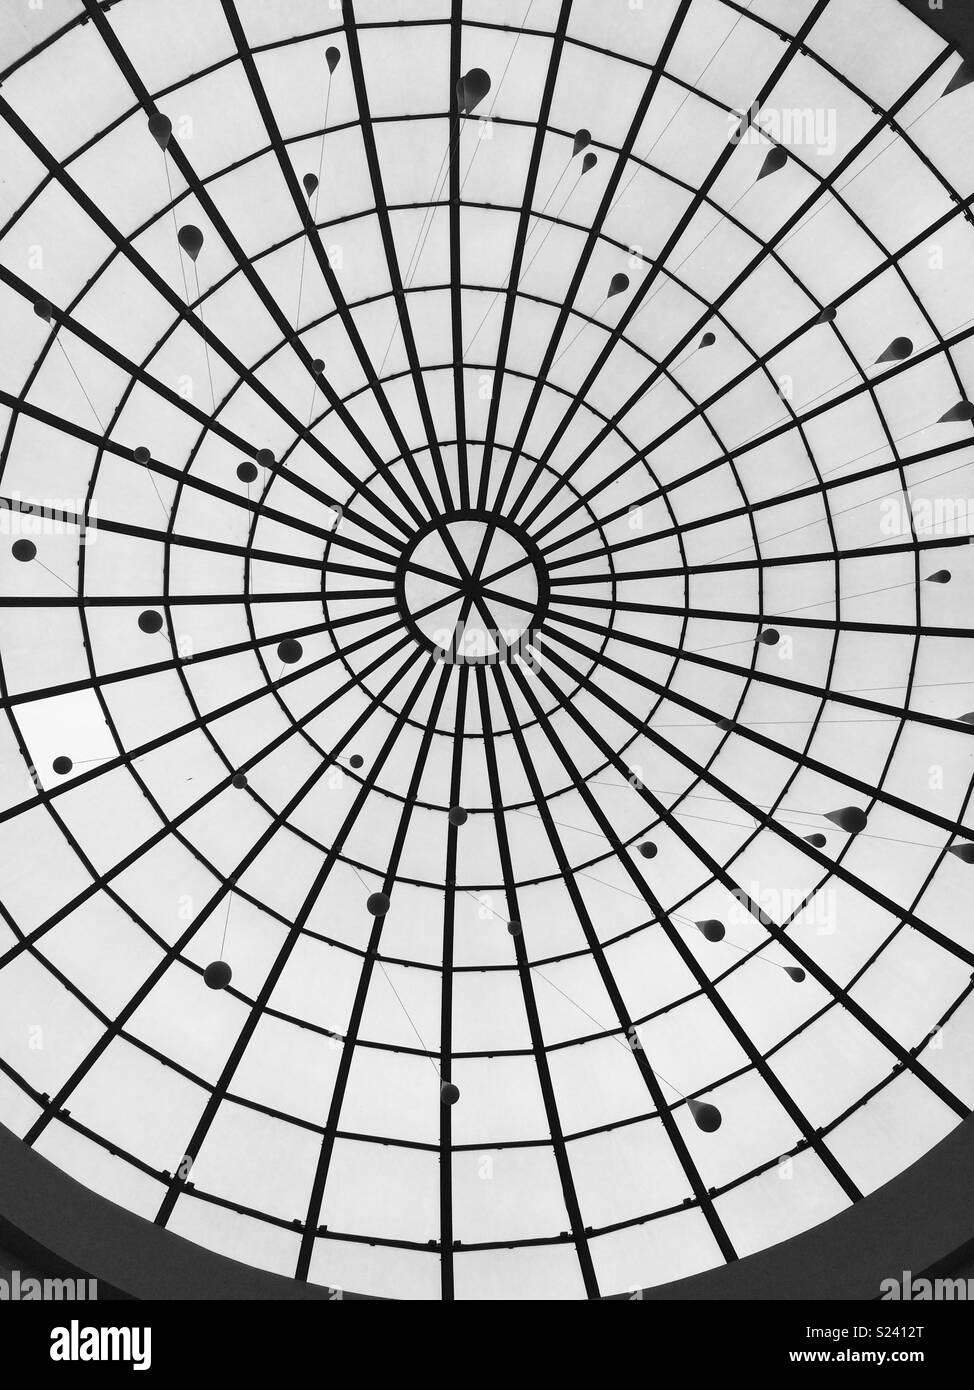 The ceiling of a shopping centre in Bucharest, Romania. Photographed from below looking directly up. Stock Photo